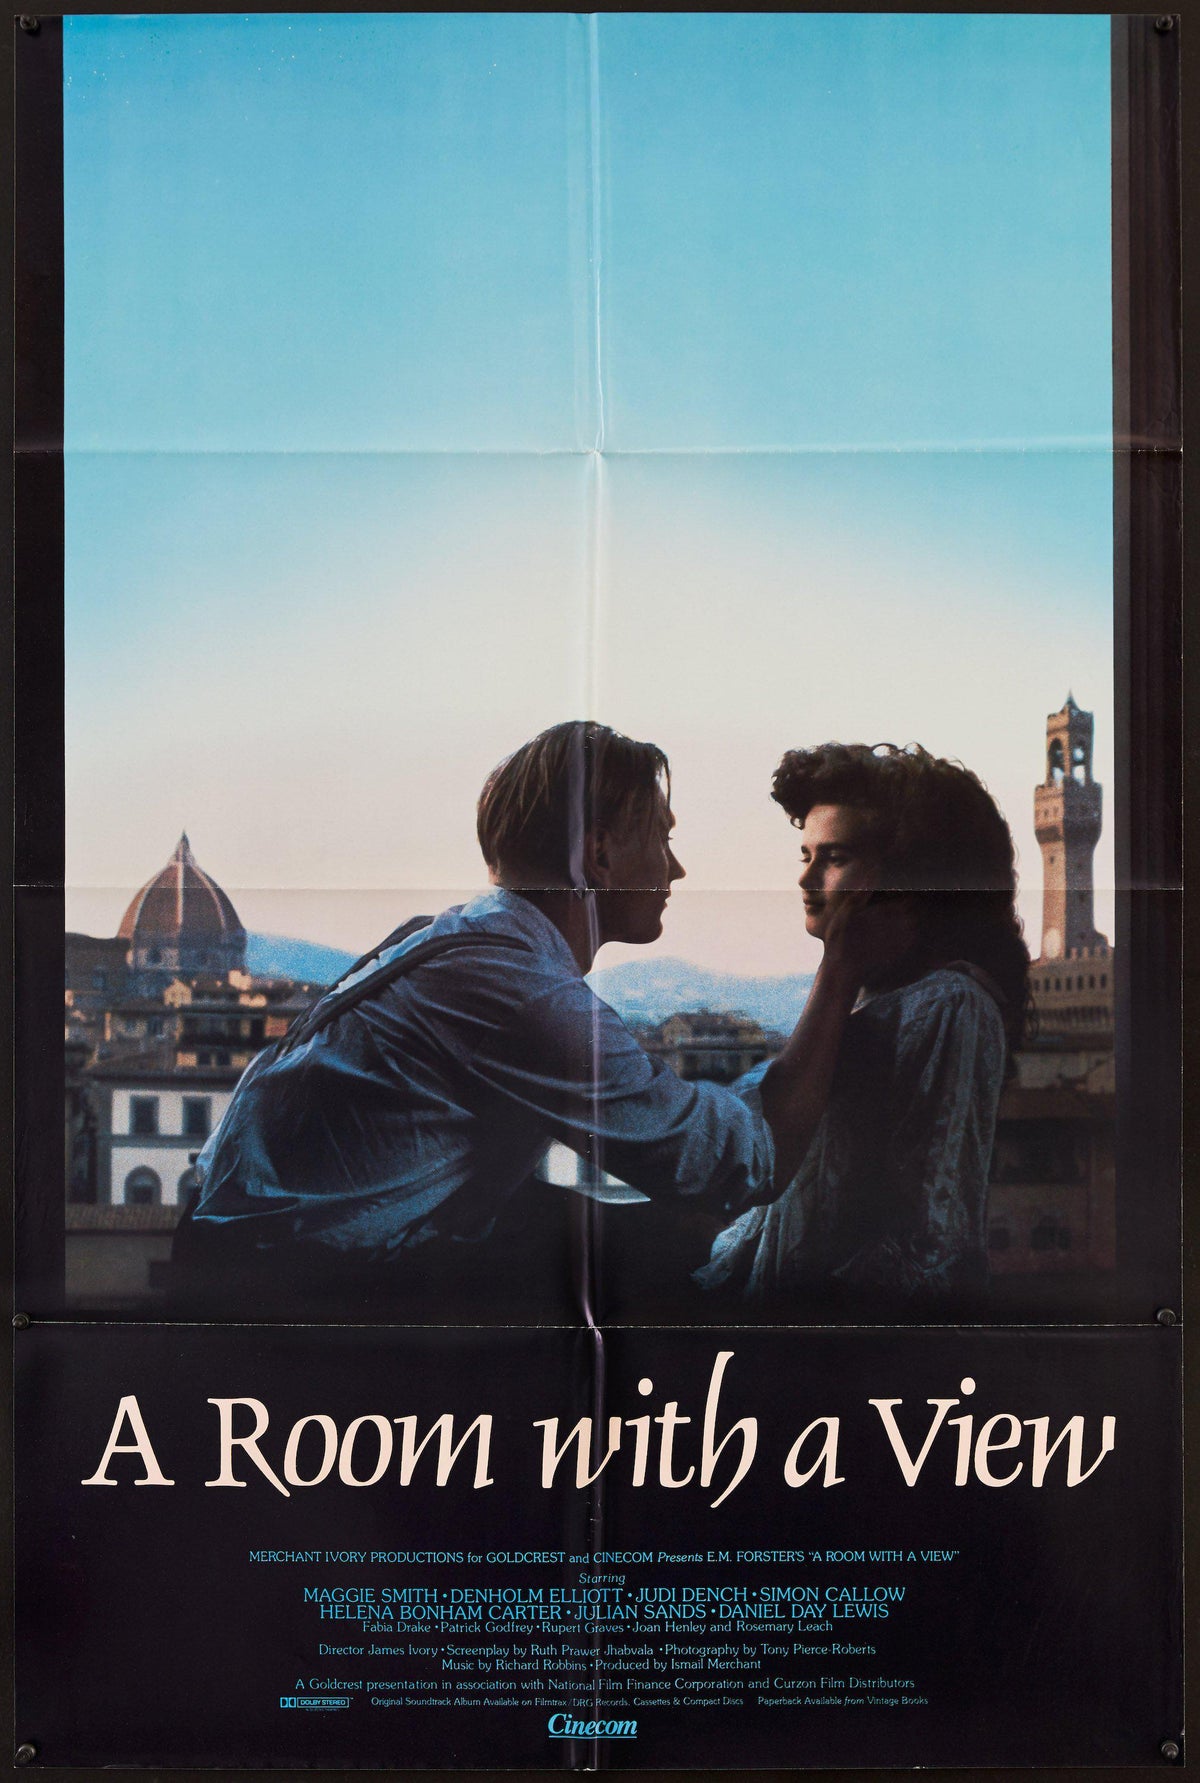 A Room With a View 1 Sheet (27x41) Original Vintage Movie Poster